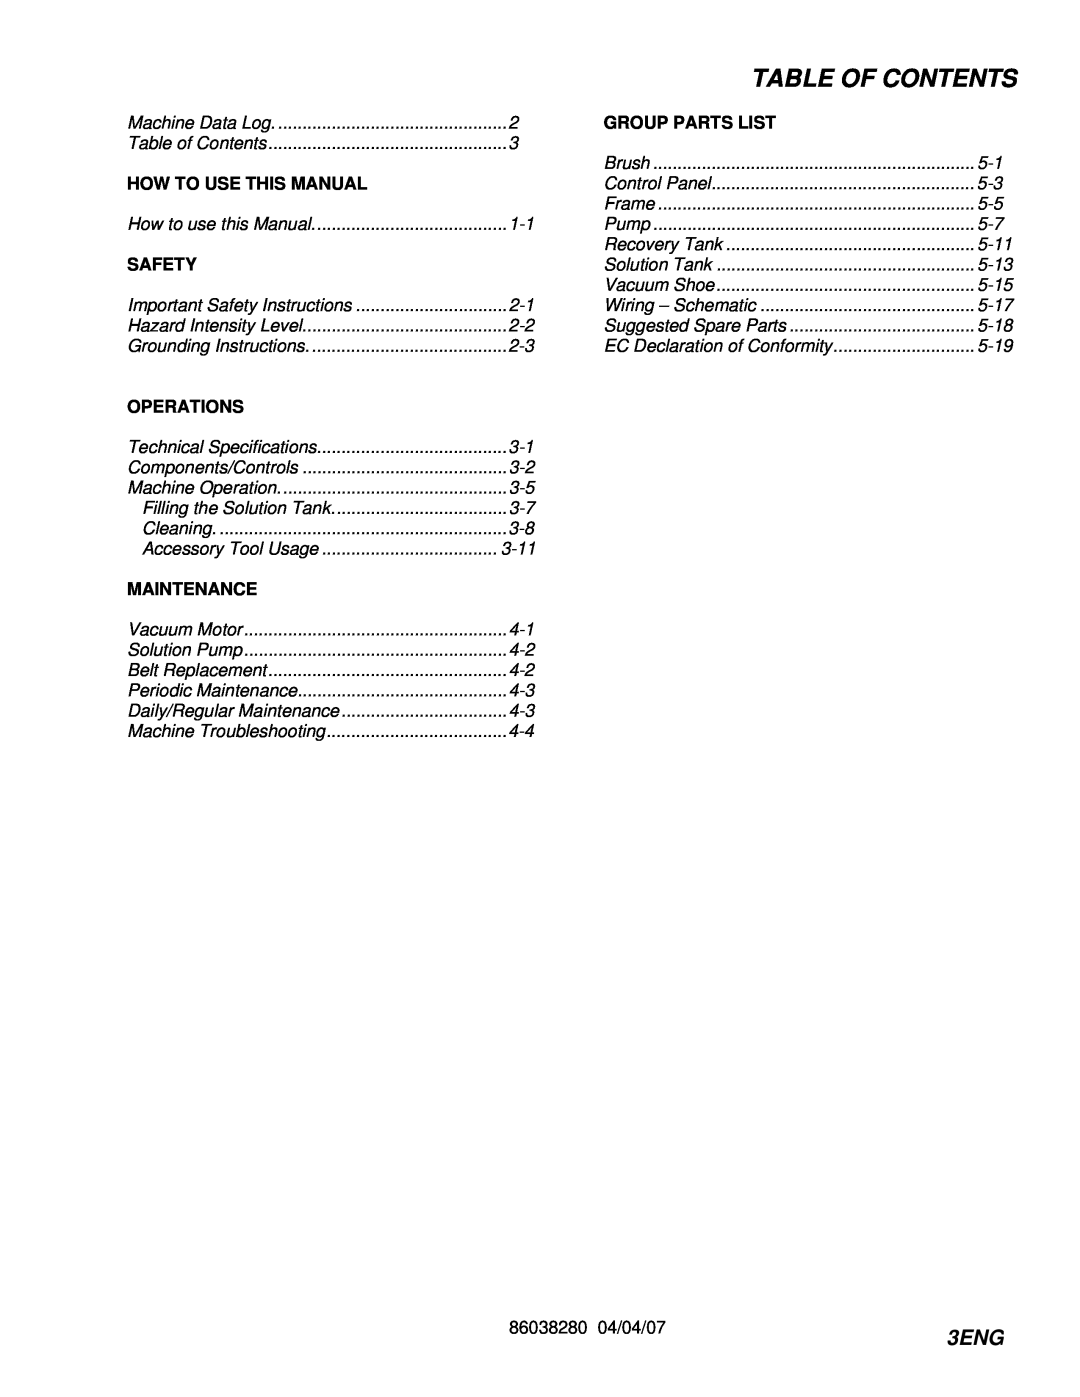 Windsor CLP12IS, CLP12IB, CLP12IE, CLP12IA manual 3ENG, Table Of Contents 